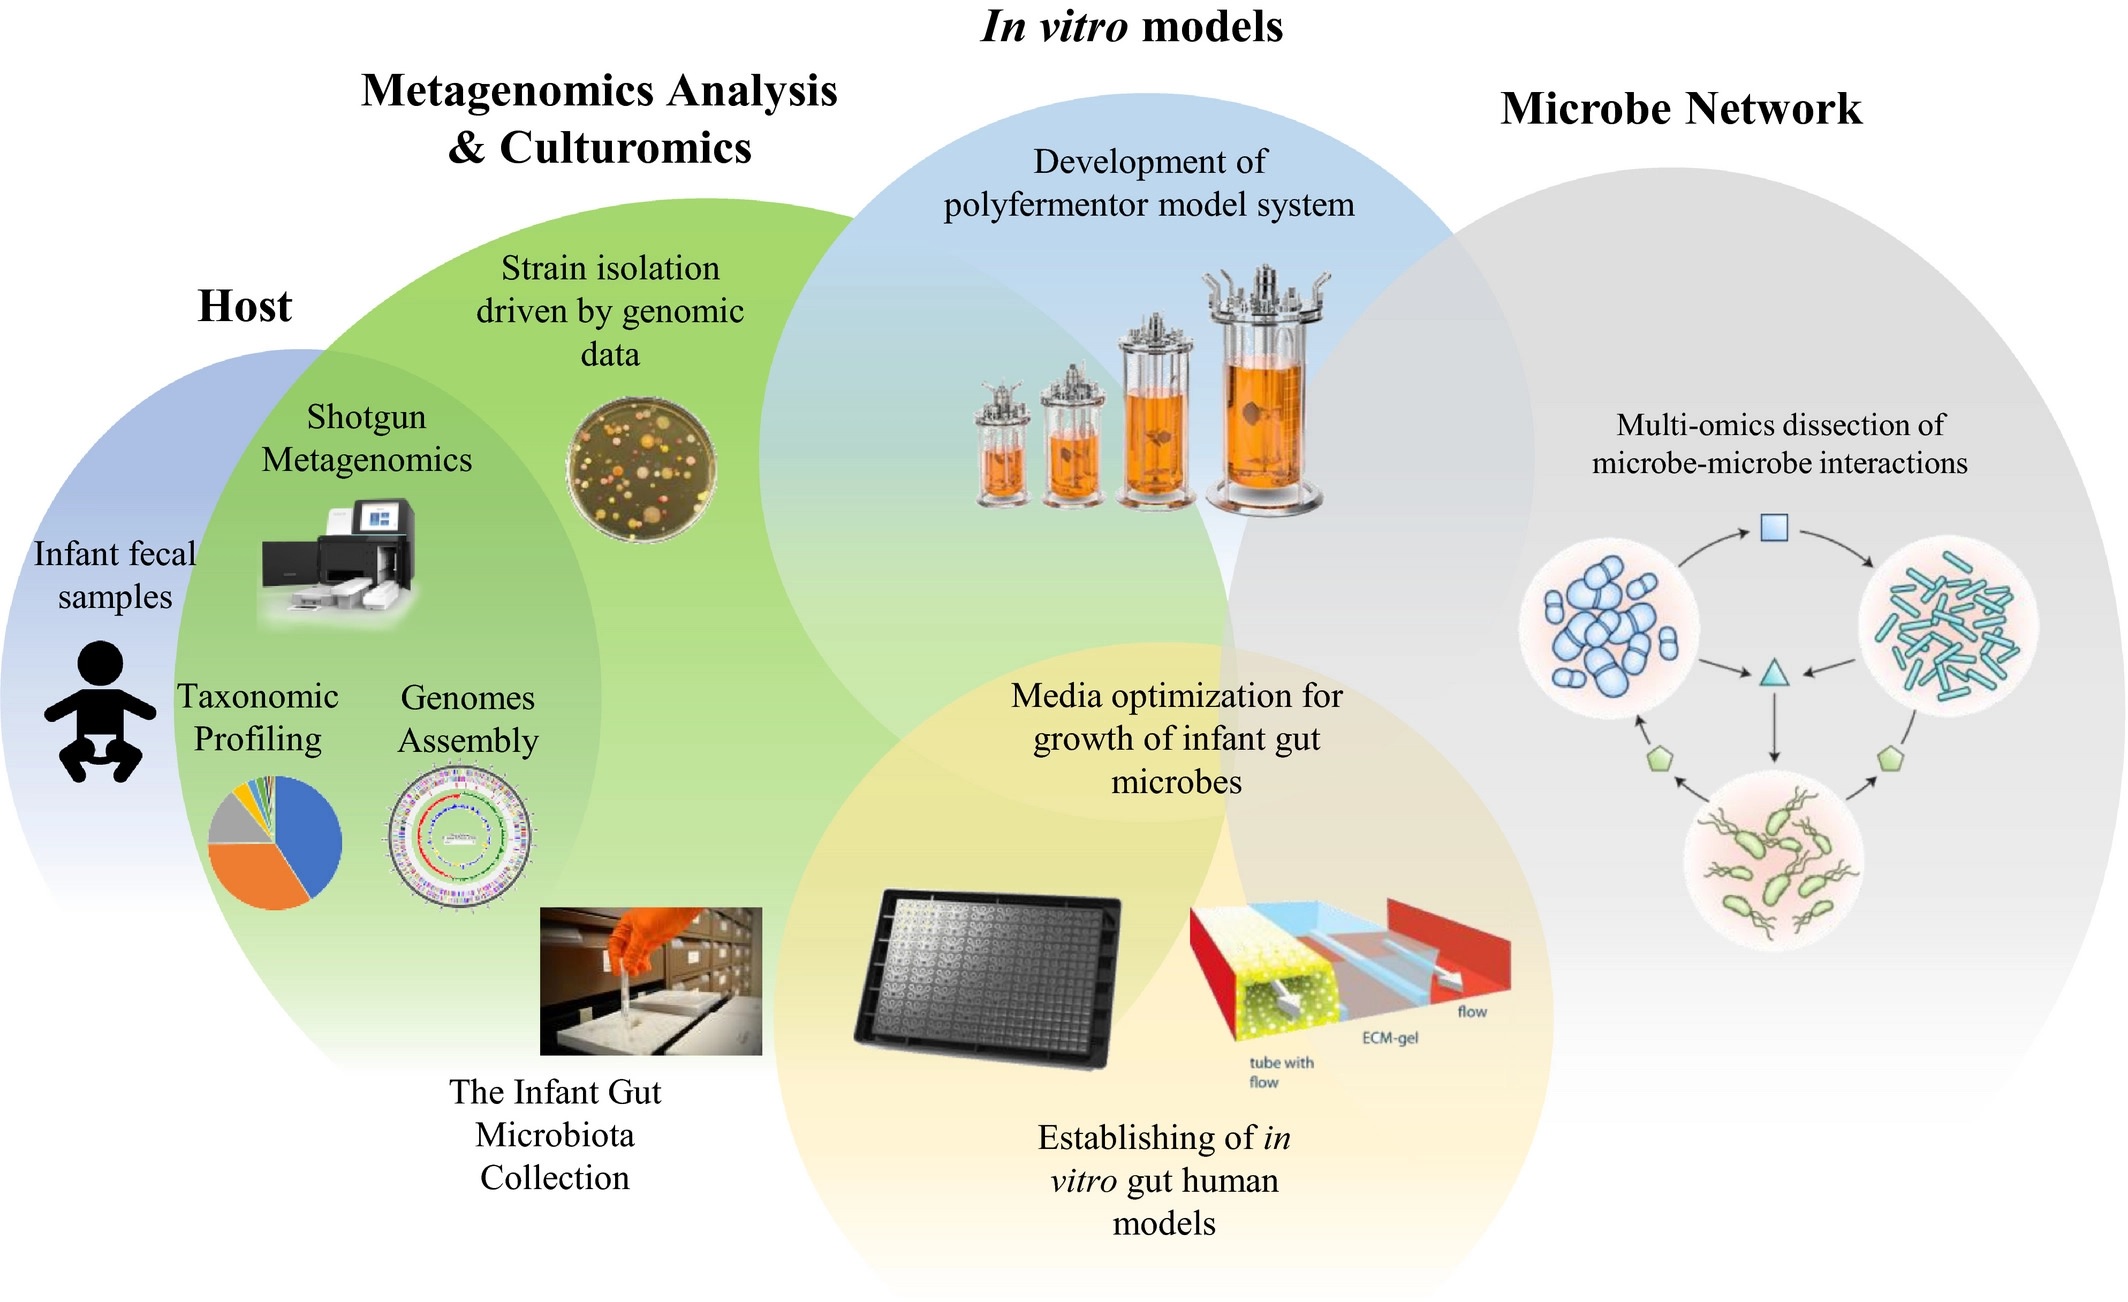 Proposed in-vitro models for microbe and host communication.